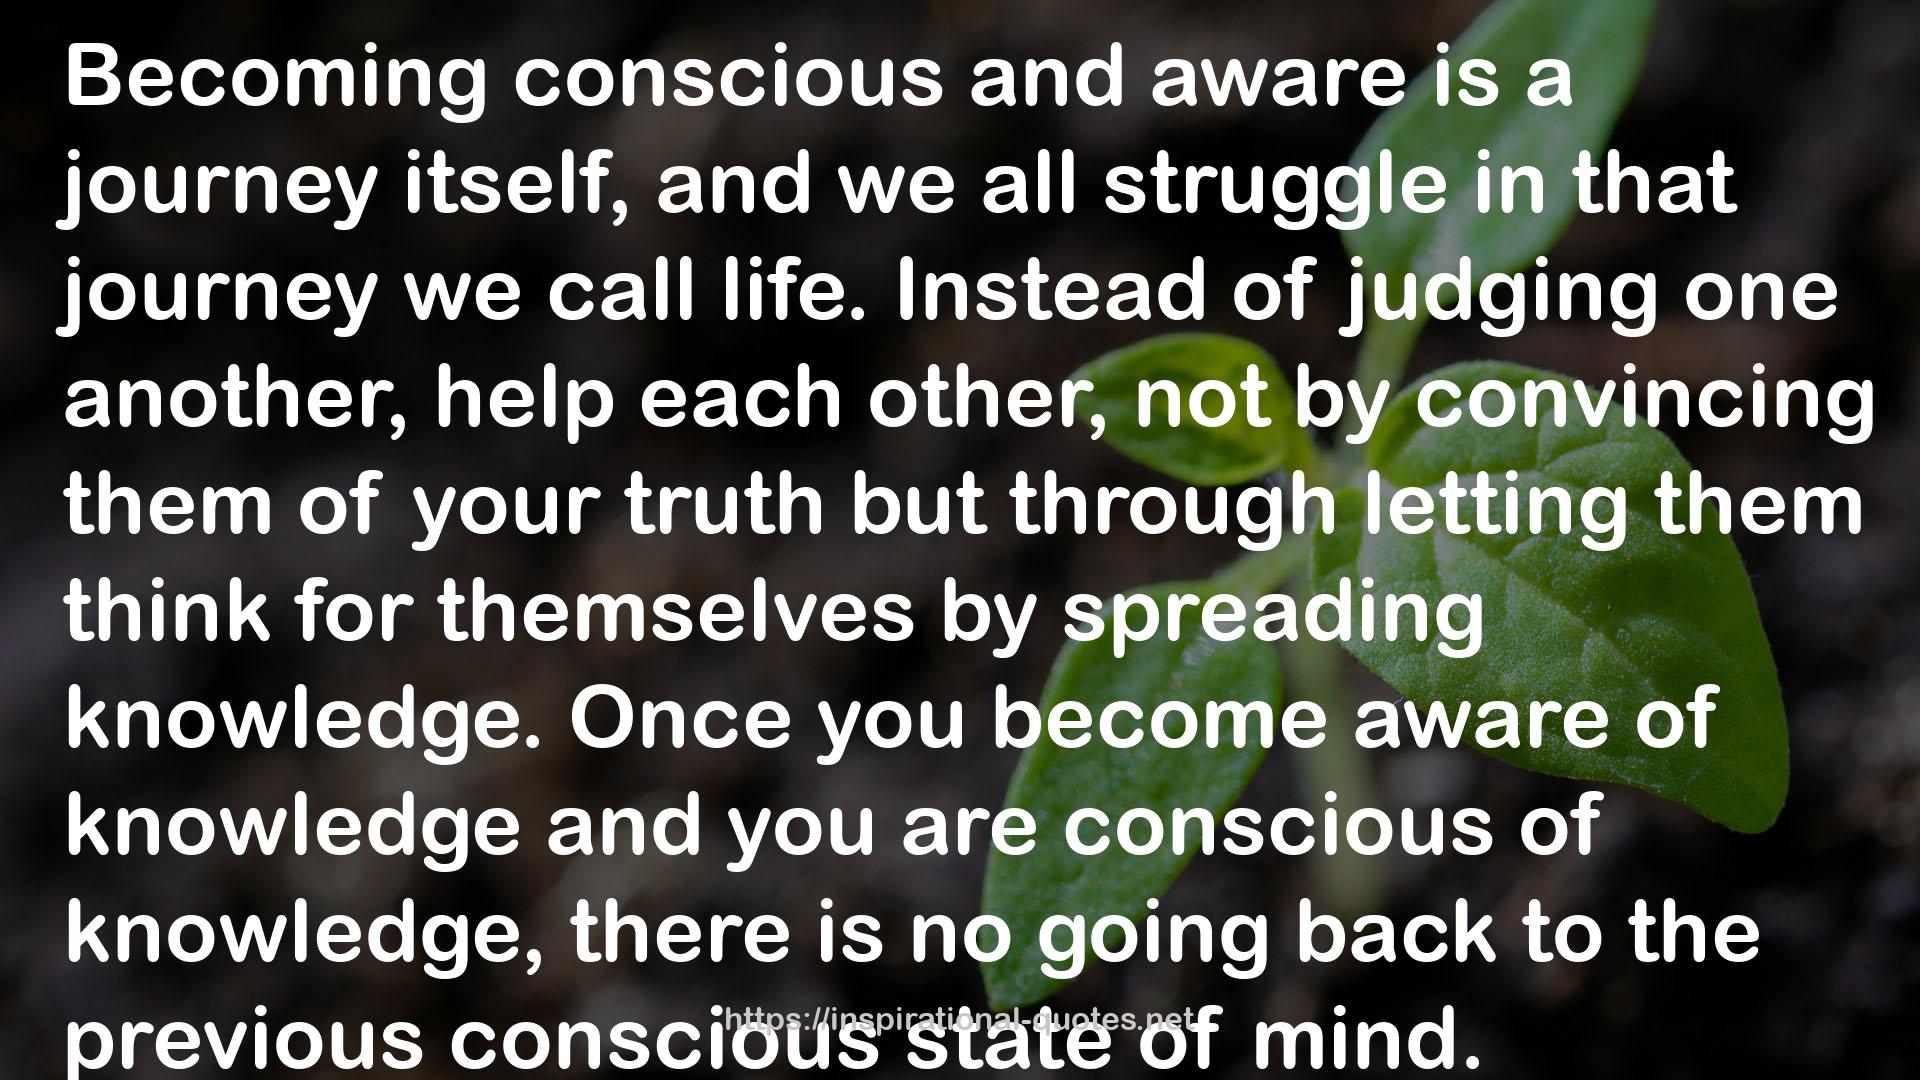 the previous conscious state  QUOTES